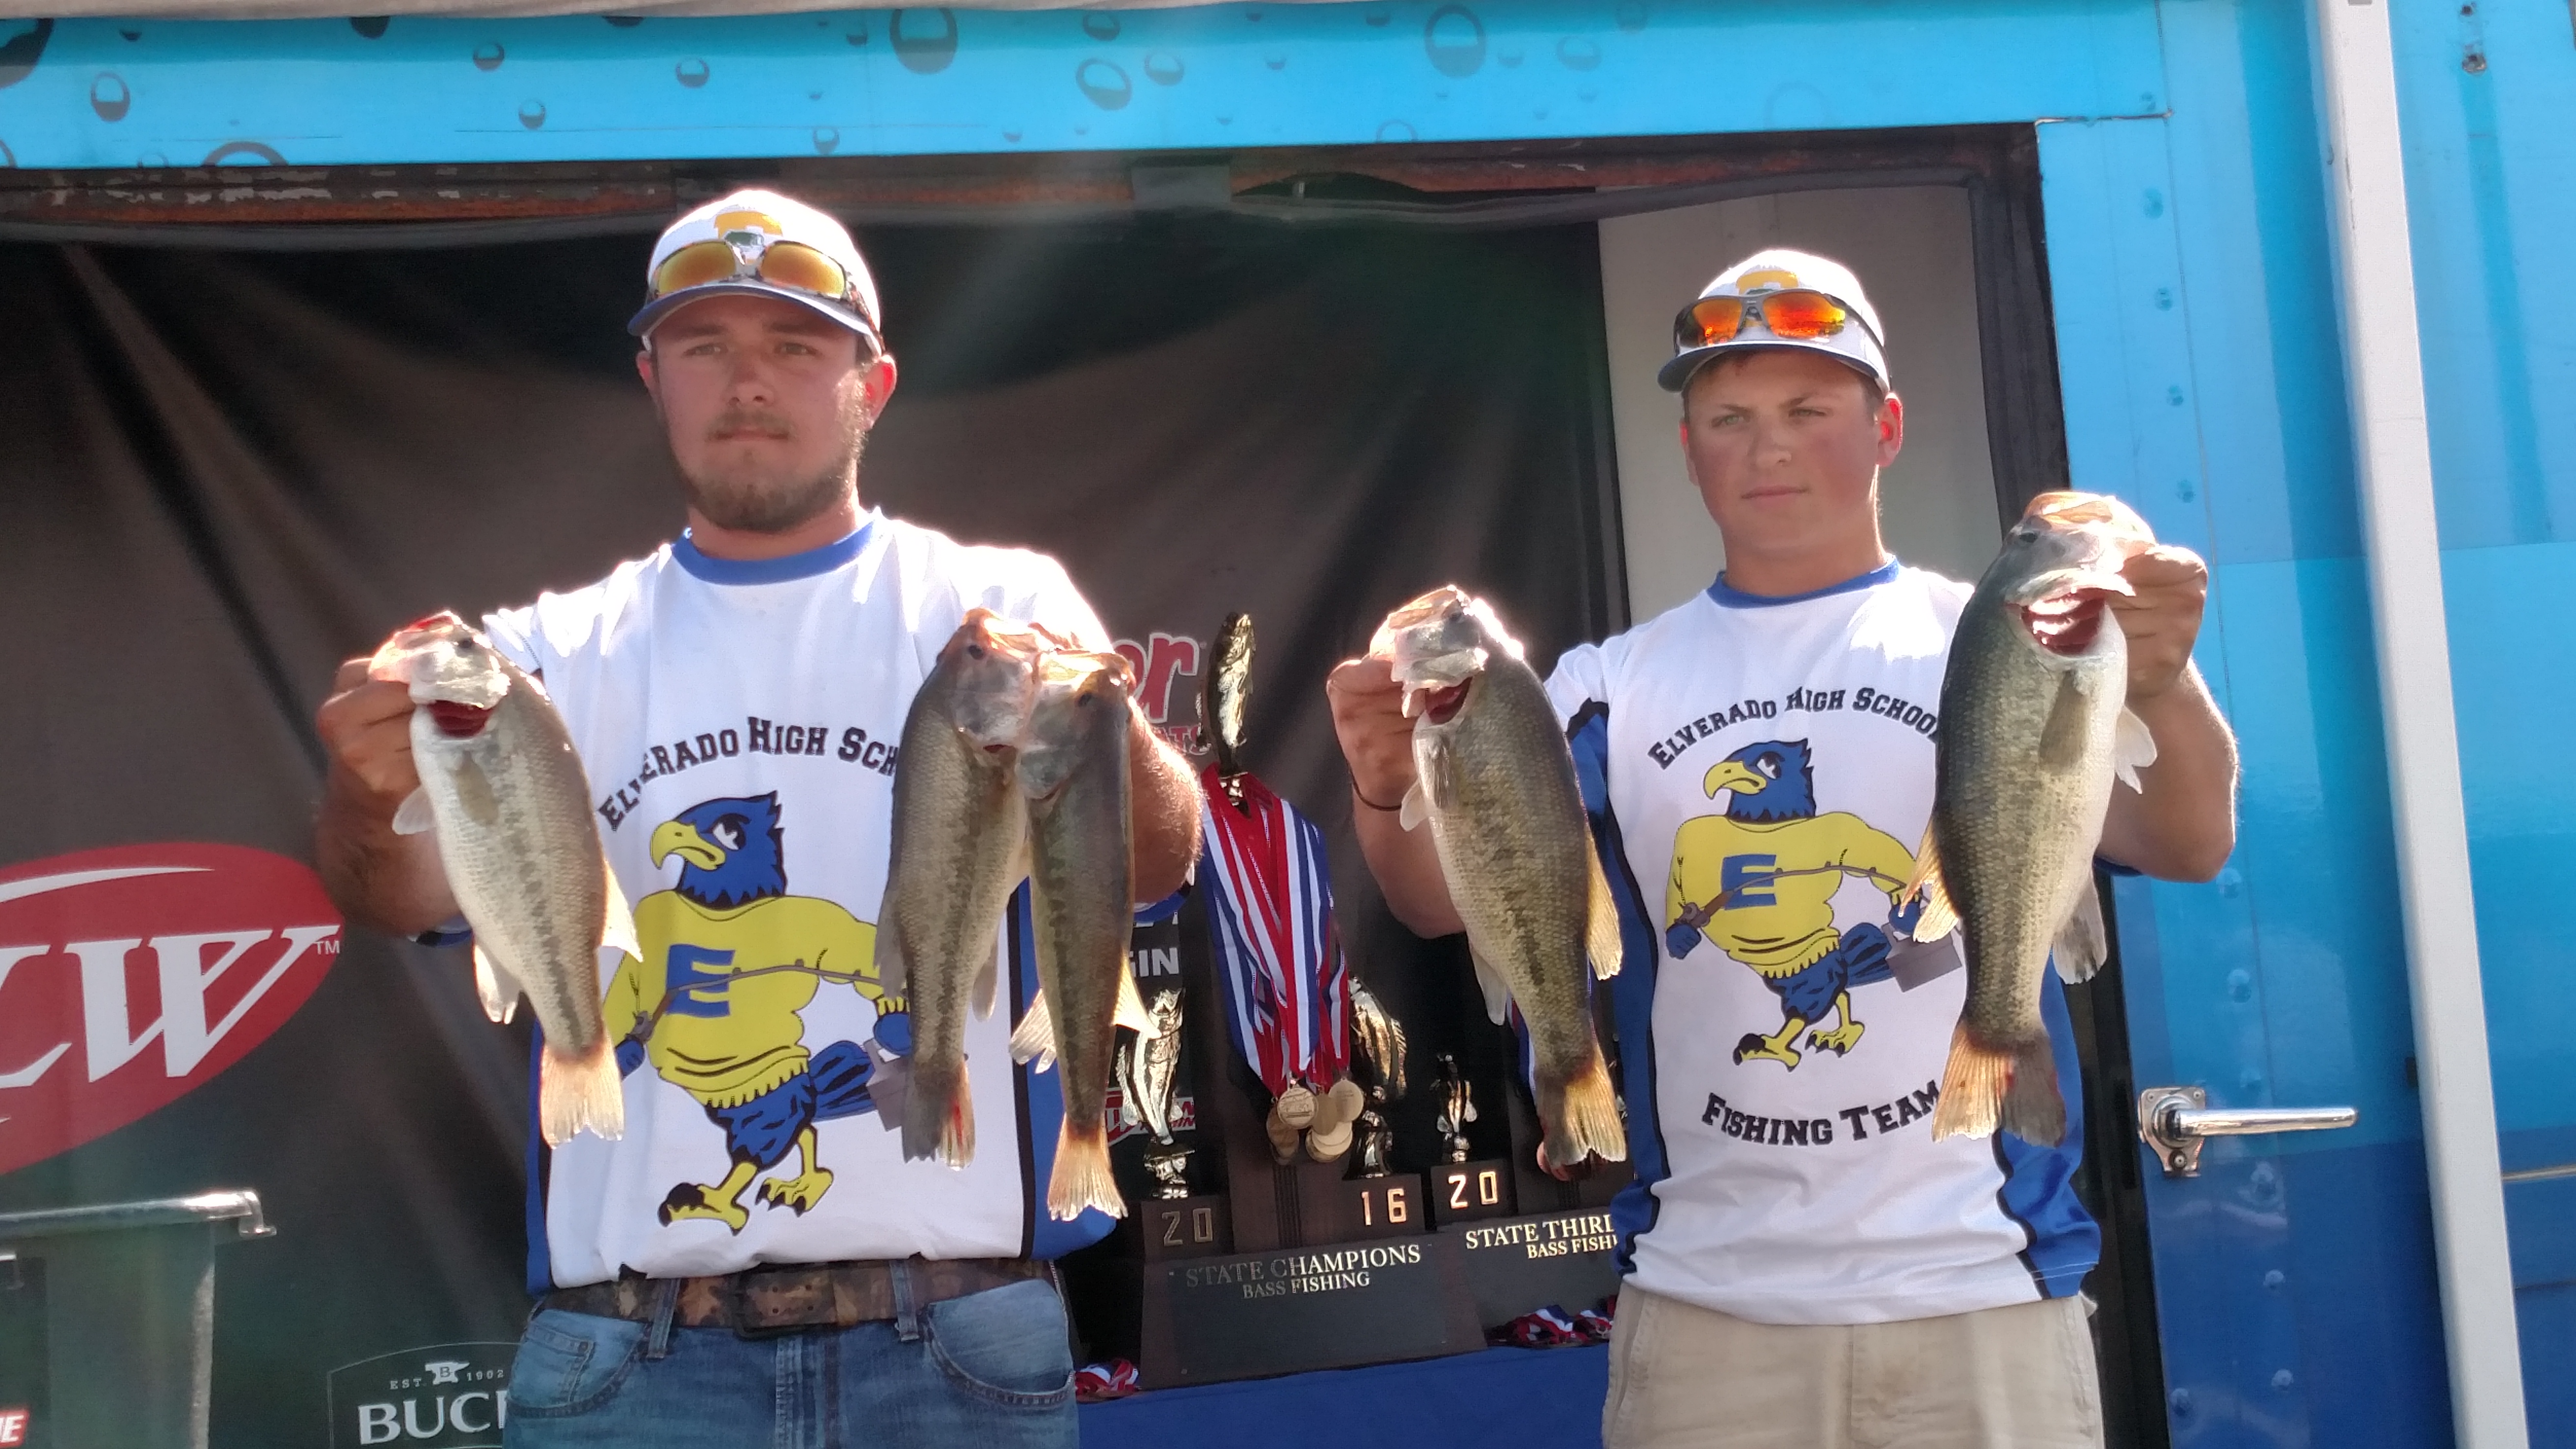 Elverado with the bag on the final day as they won the eighth IHSA state championship for bass fishing. | Credit: Dale Bowman